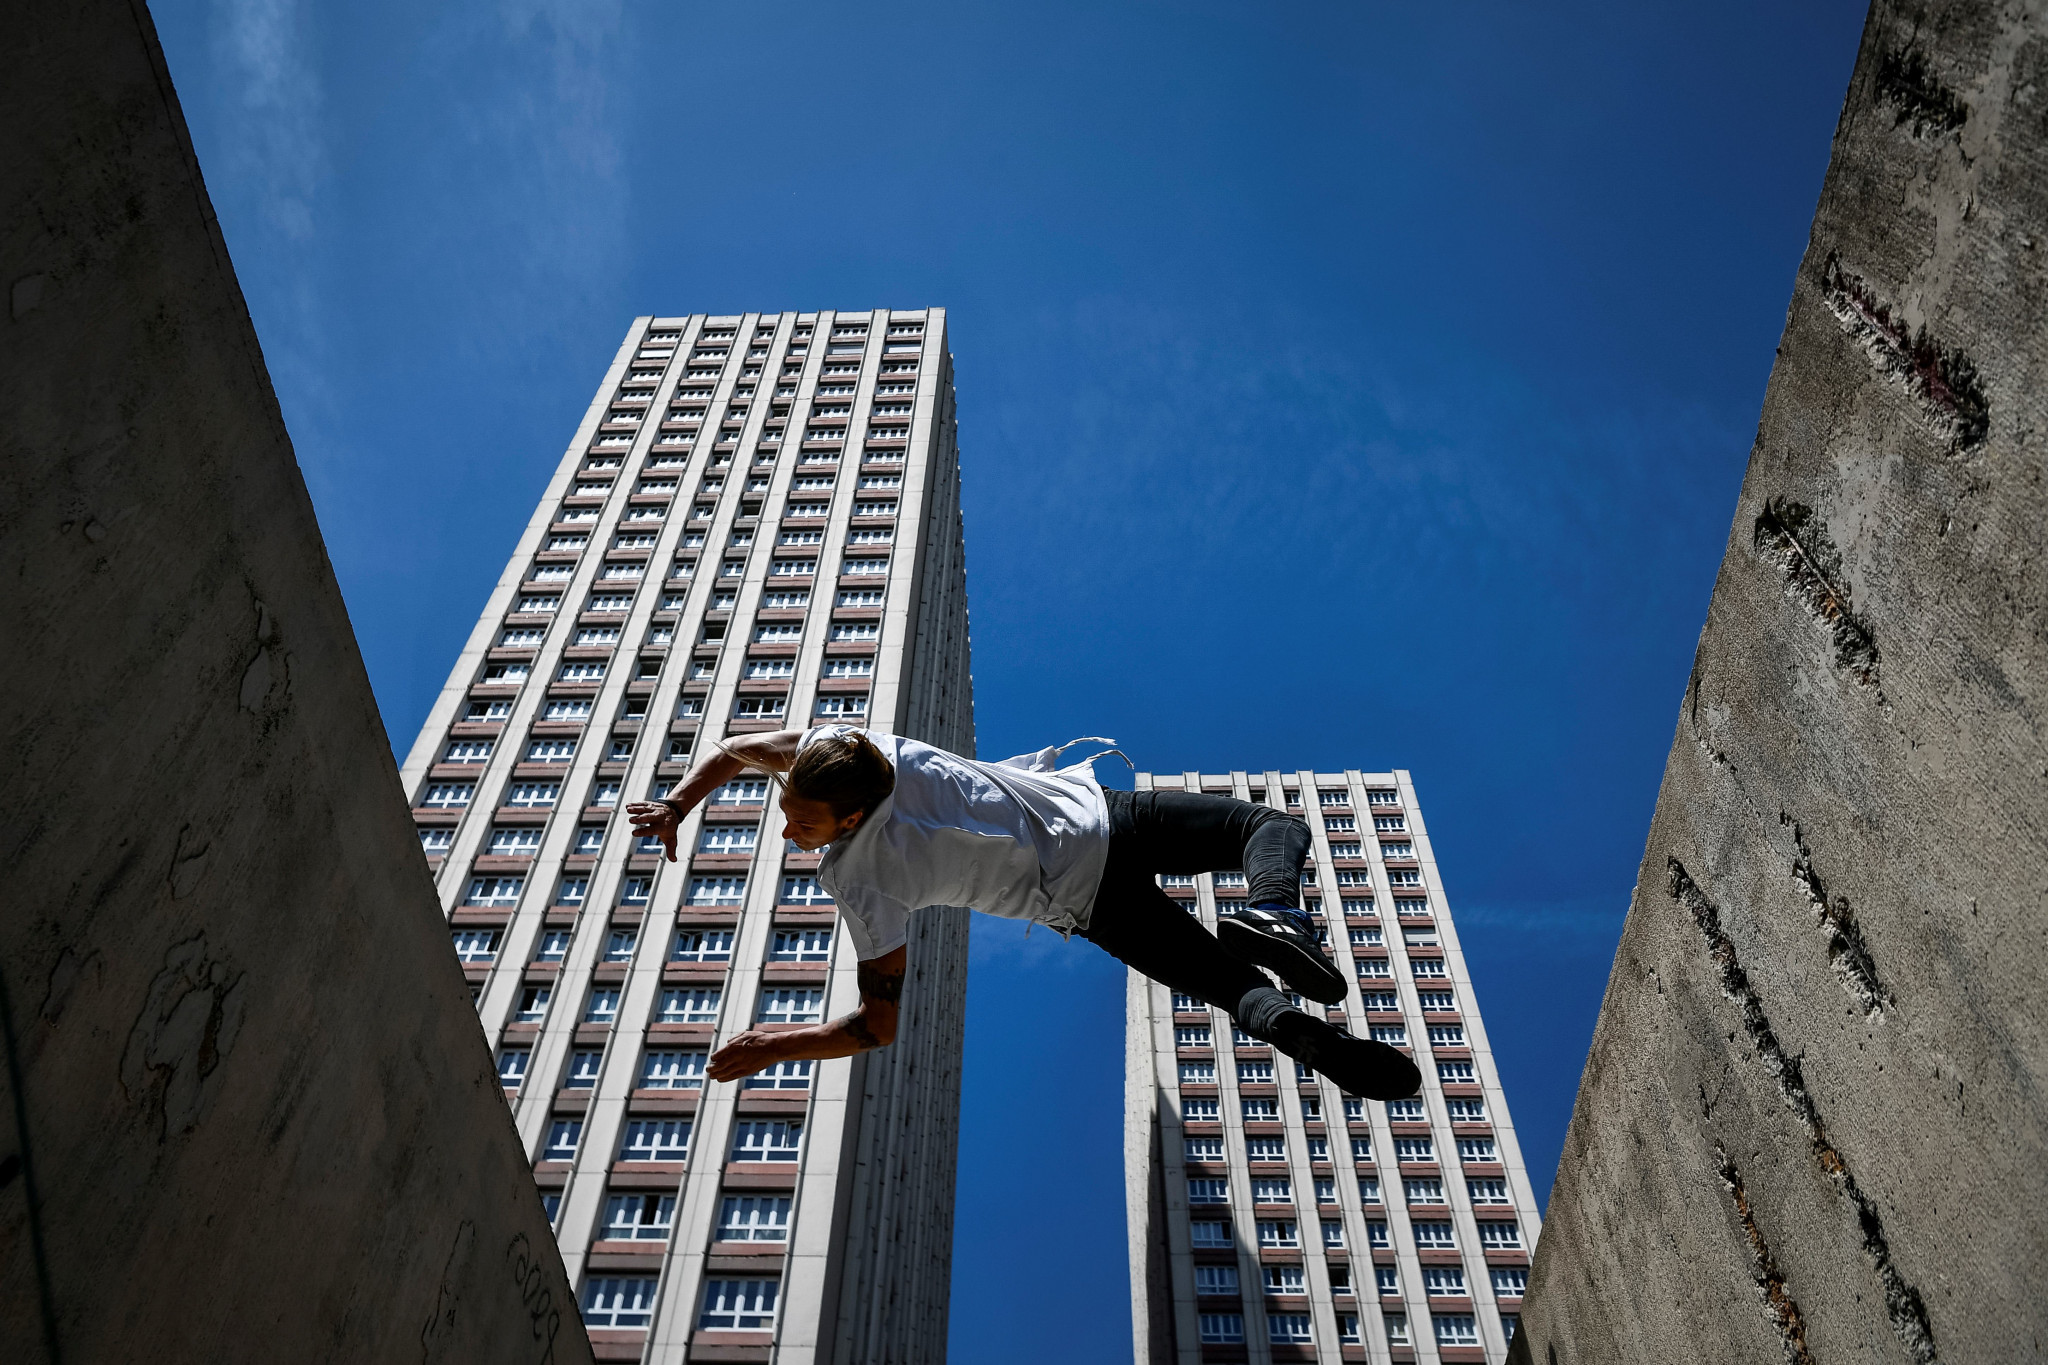 Sofia Parkour World Cup from 2021 to serve as Birmingham 2022 World Games qualifier